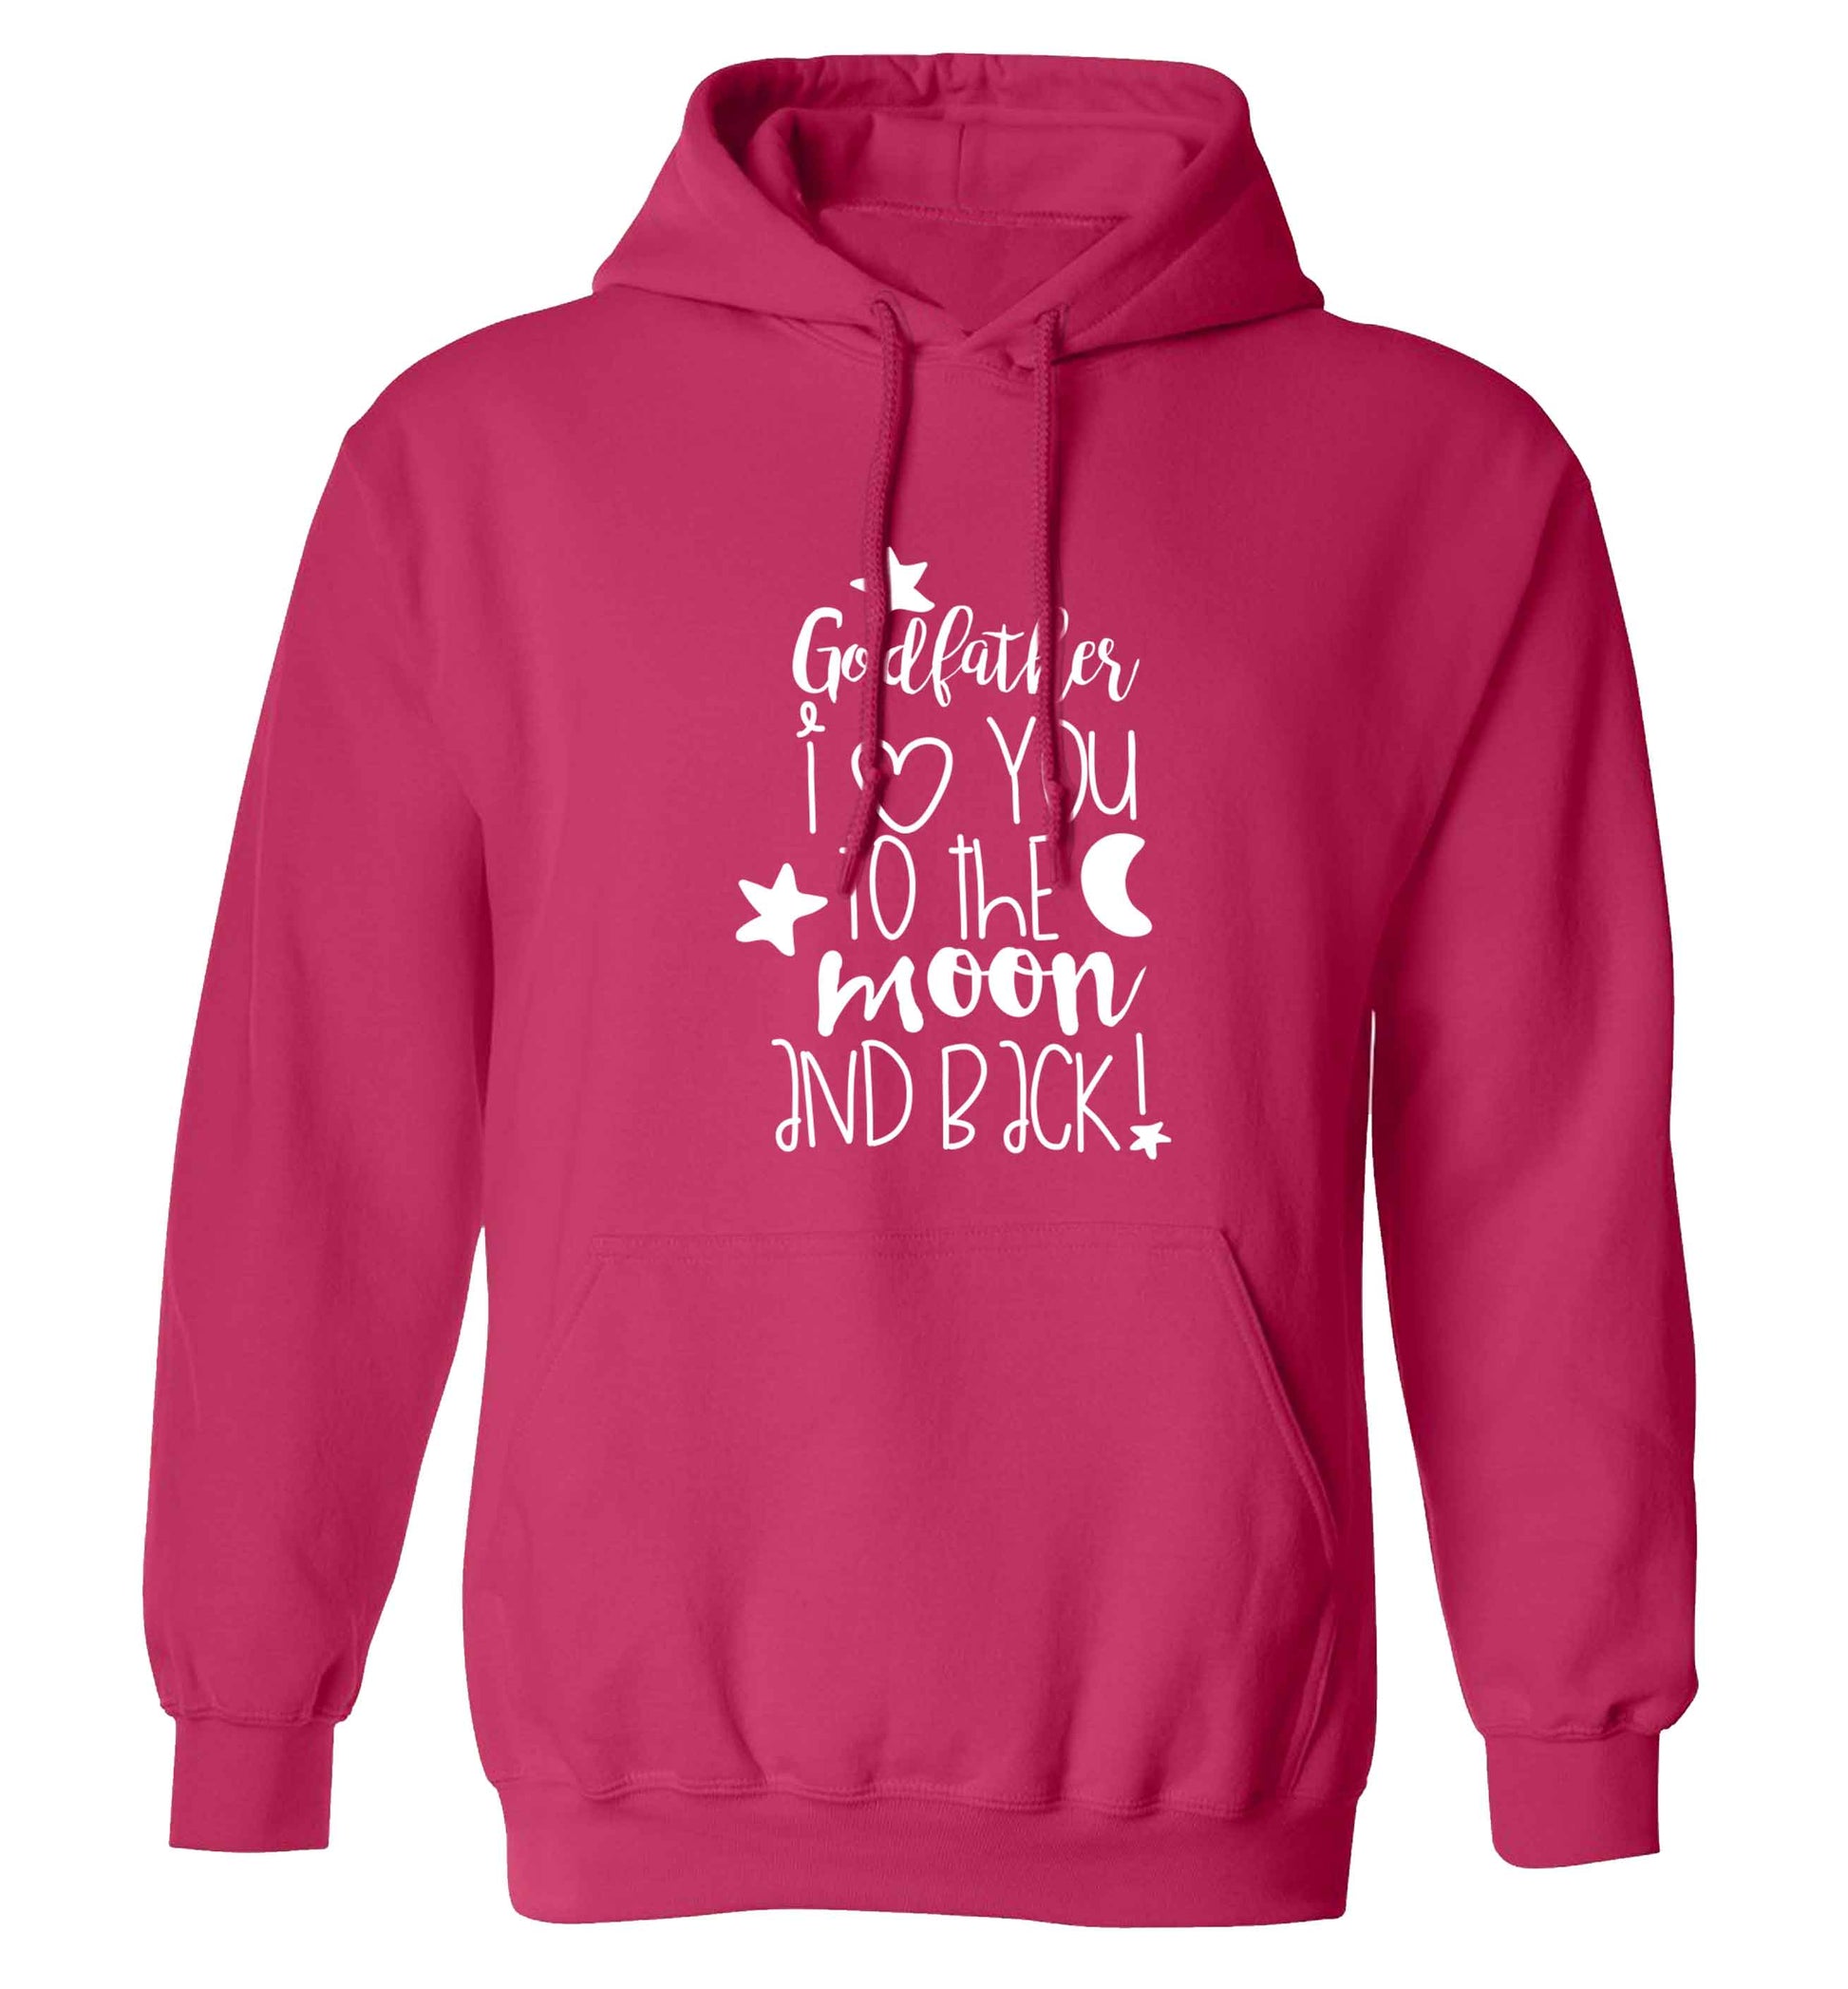 Godfather I love you to the moon and back adults unisex pink hoodie 2XL